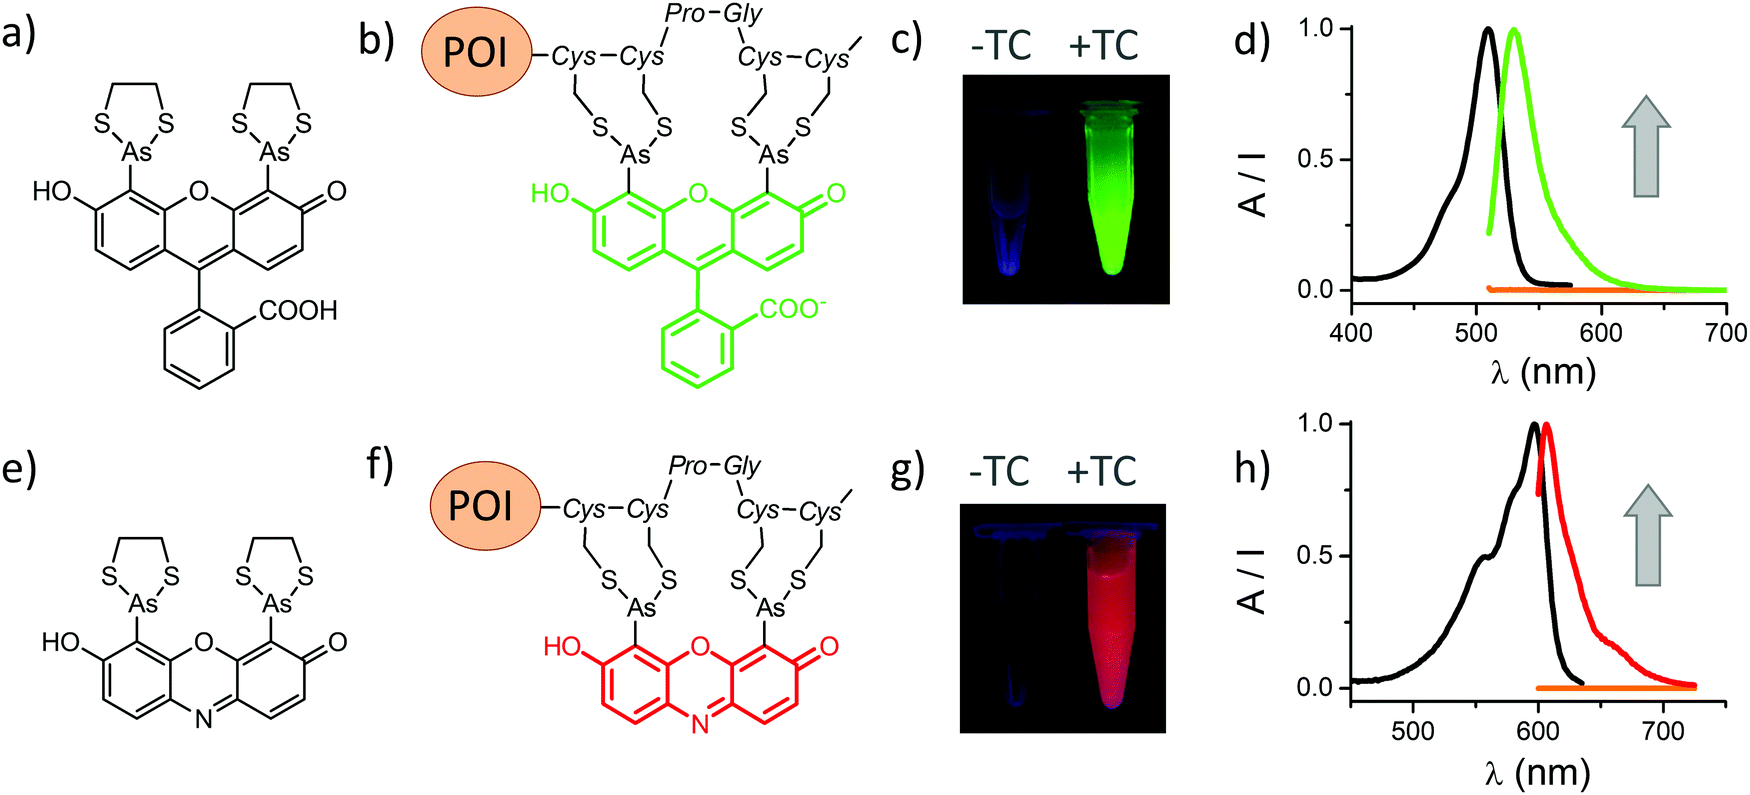 Biarsenical fluorescent probes for multifunctional site-specific  modification of proteins applicable in life sciences: an overview and  future outlook - Metallomics (RSC Publishing) DOI:10.1039/D0MT00093K